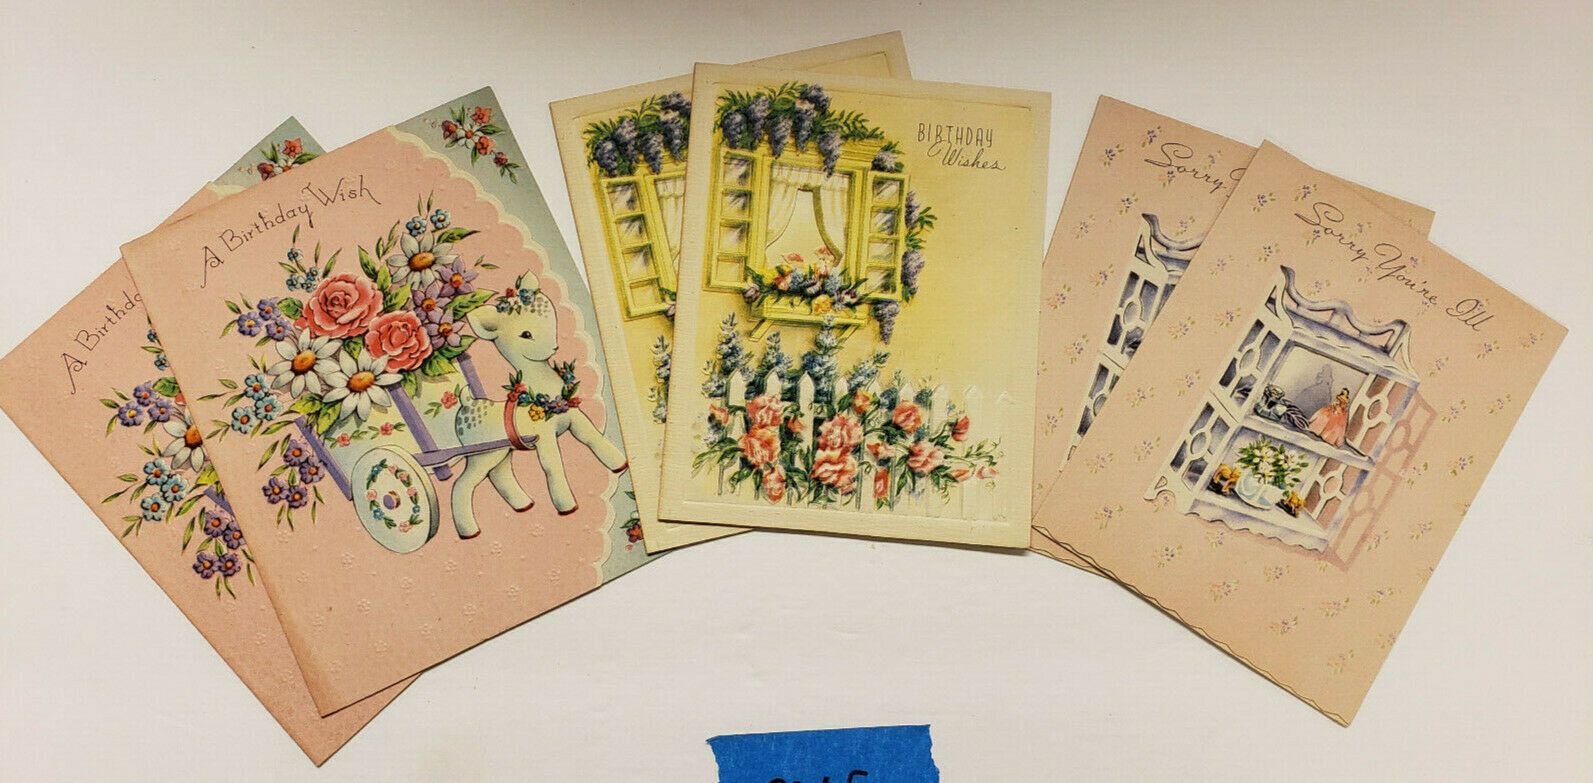 Vintage Greeting Card Lot, 6 Cards - 3 Pairs, 1940-50s, (pa65)nos